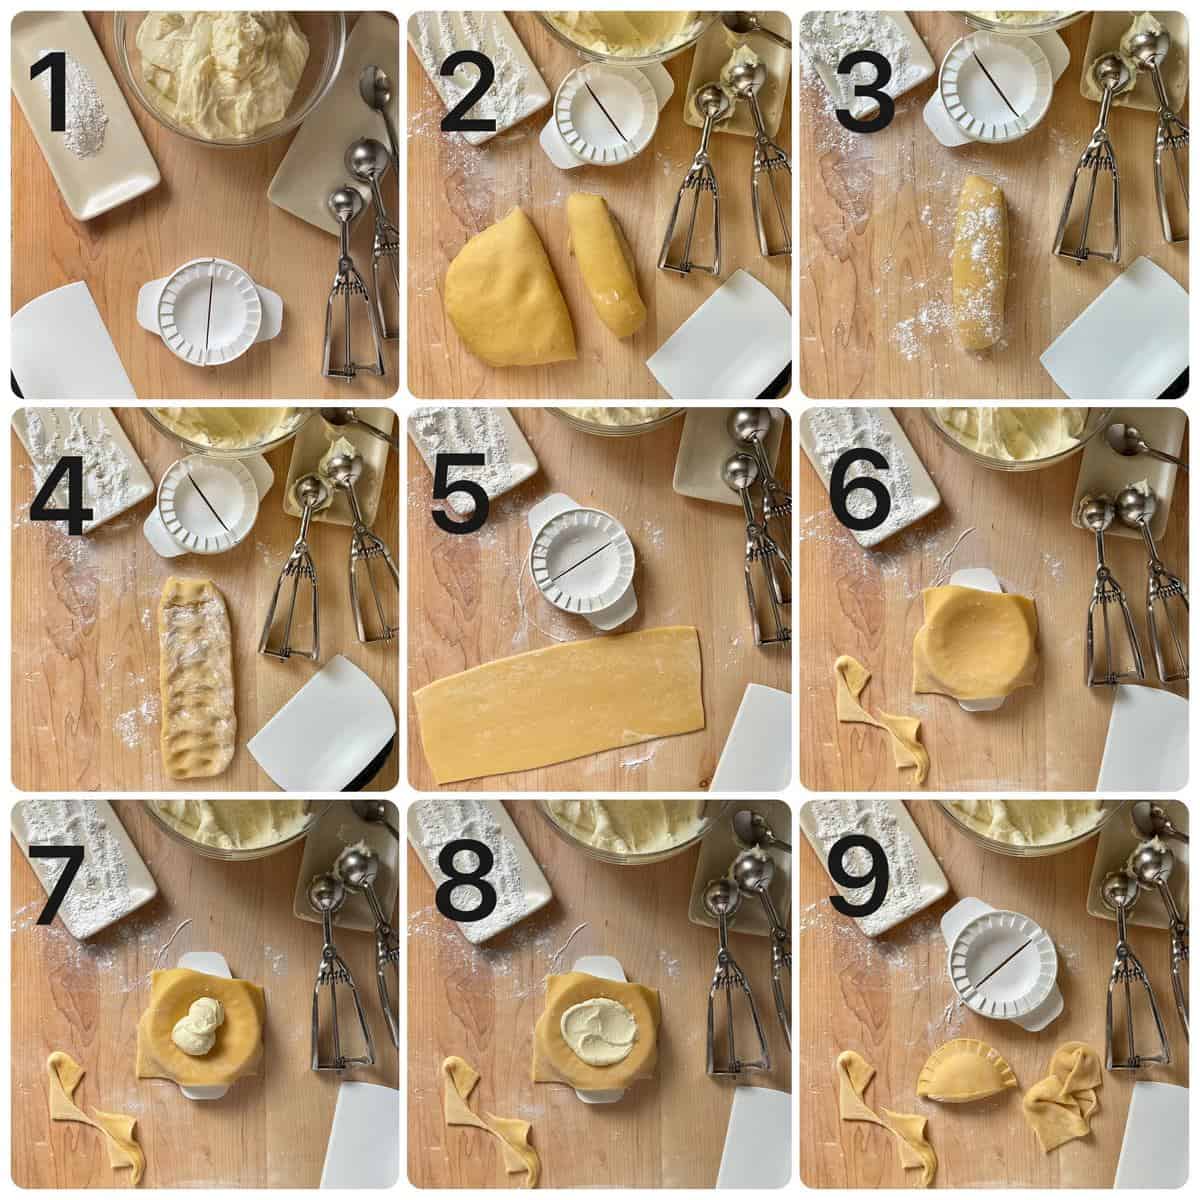 The step by step process to fill the mini ricotta pies.